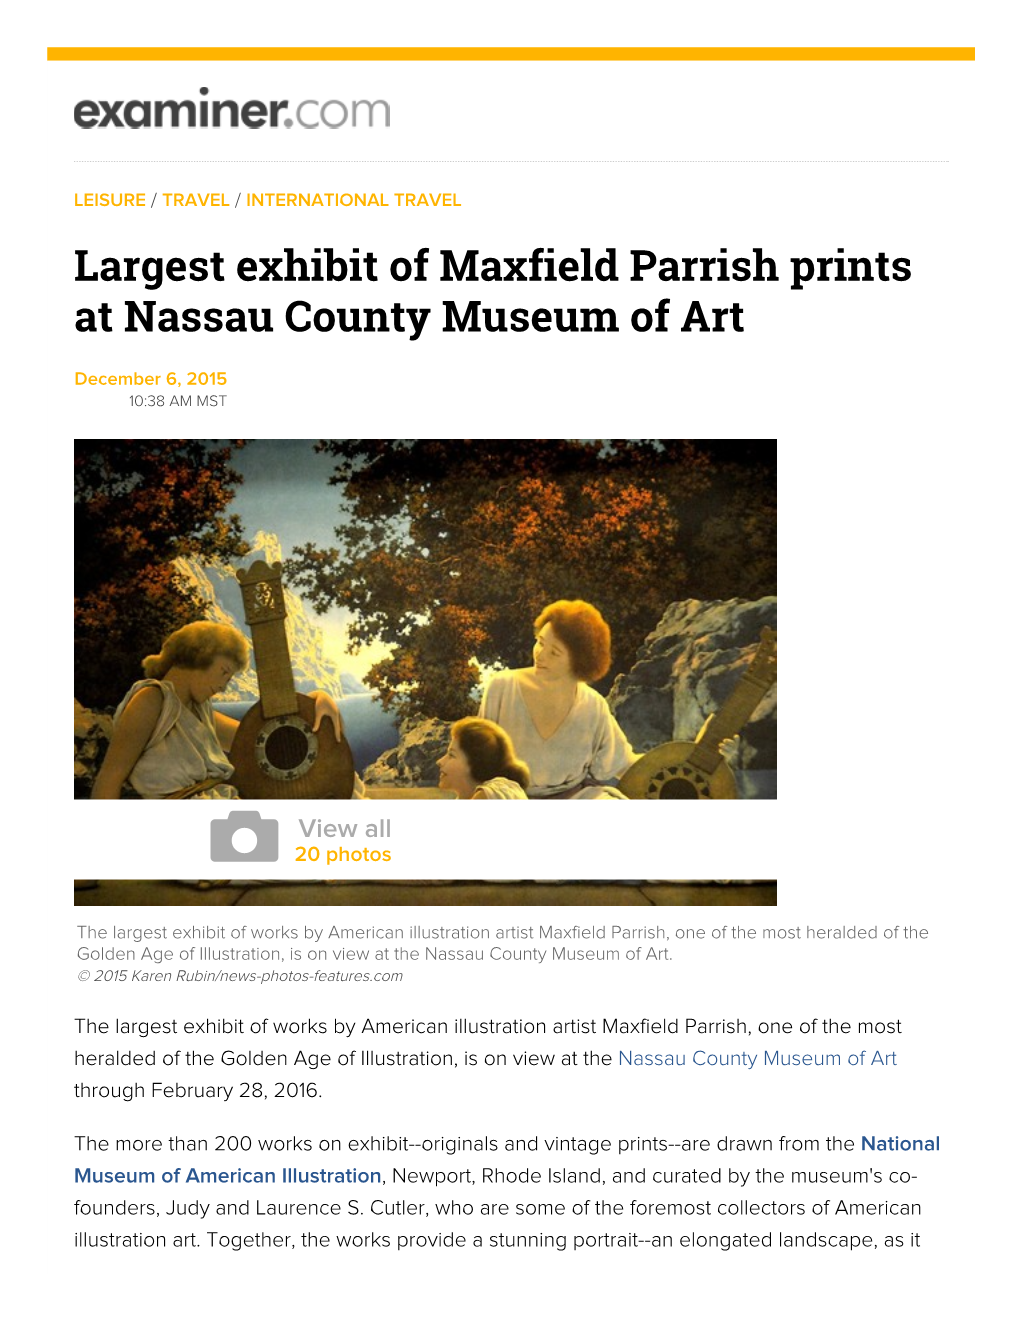 Largest Exhibit of Maxfield Parrish Prints at Nassau County Museum of Art